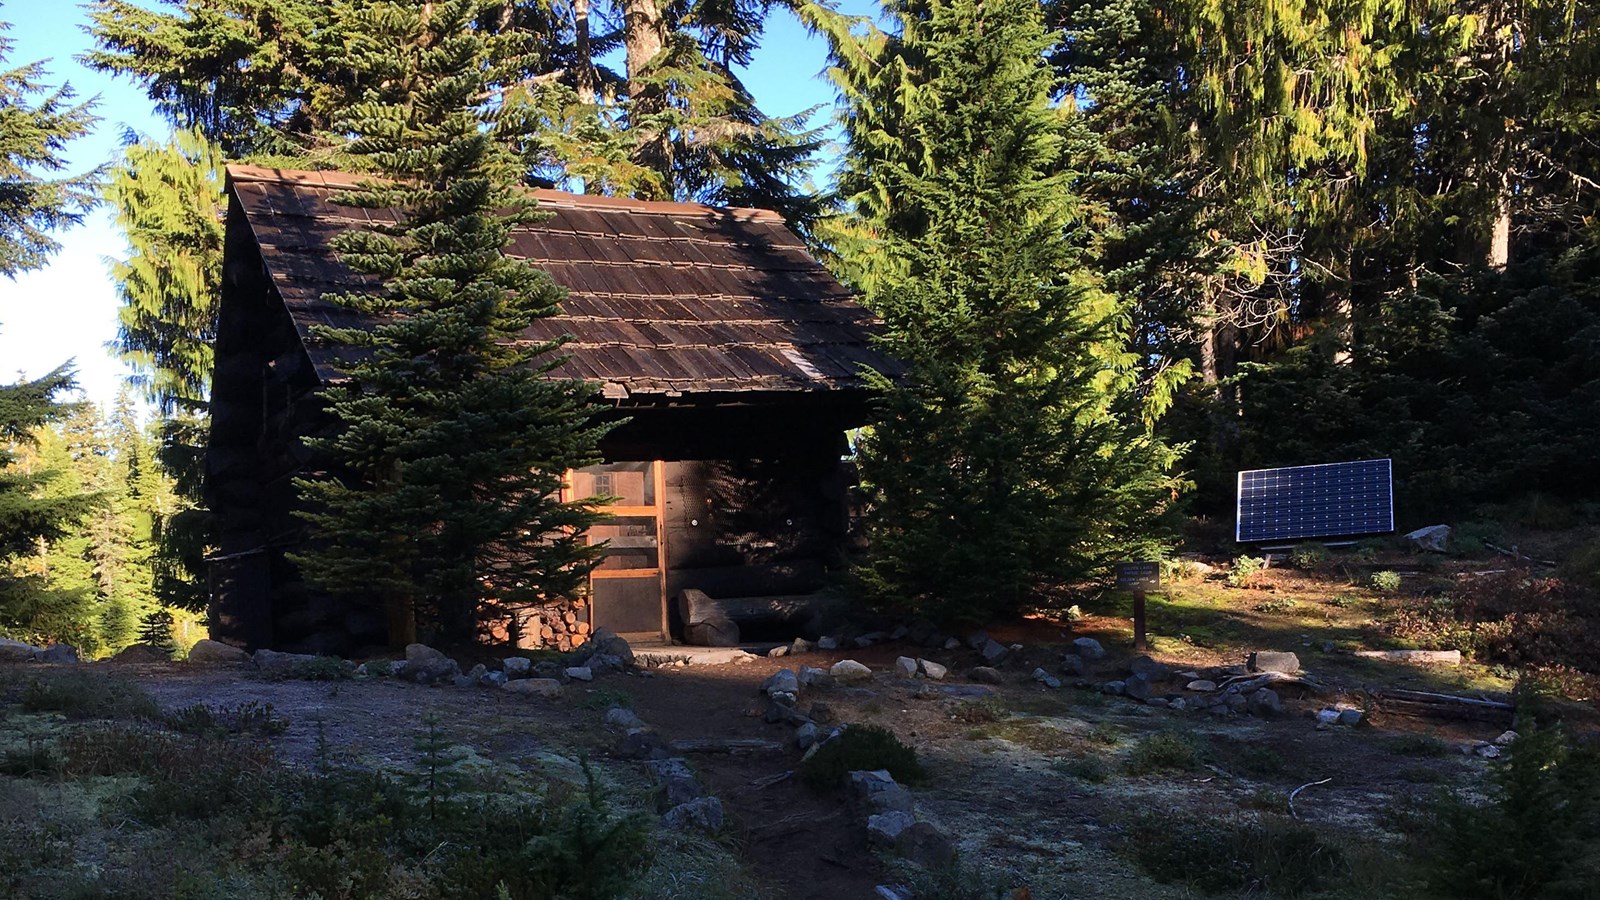 Visit One of the Oldest Log Cabins in the USA